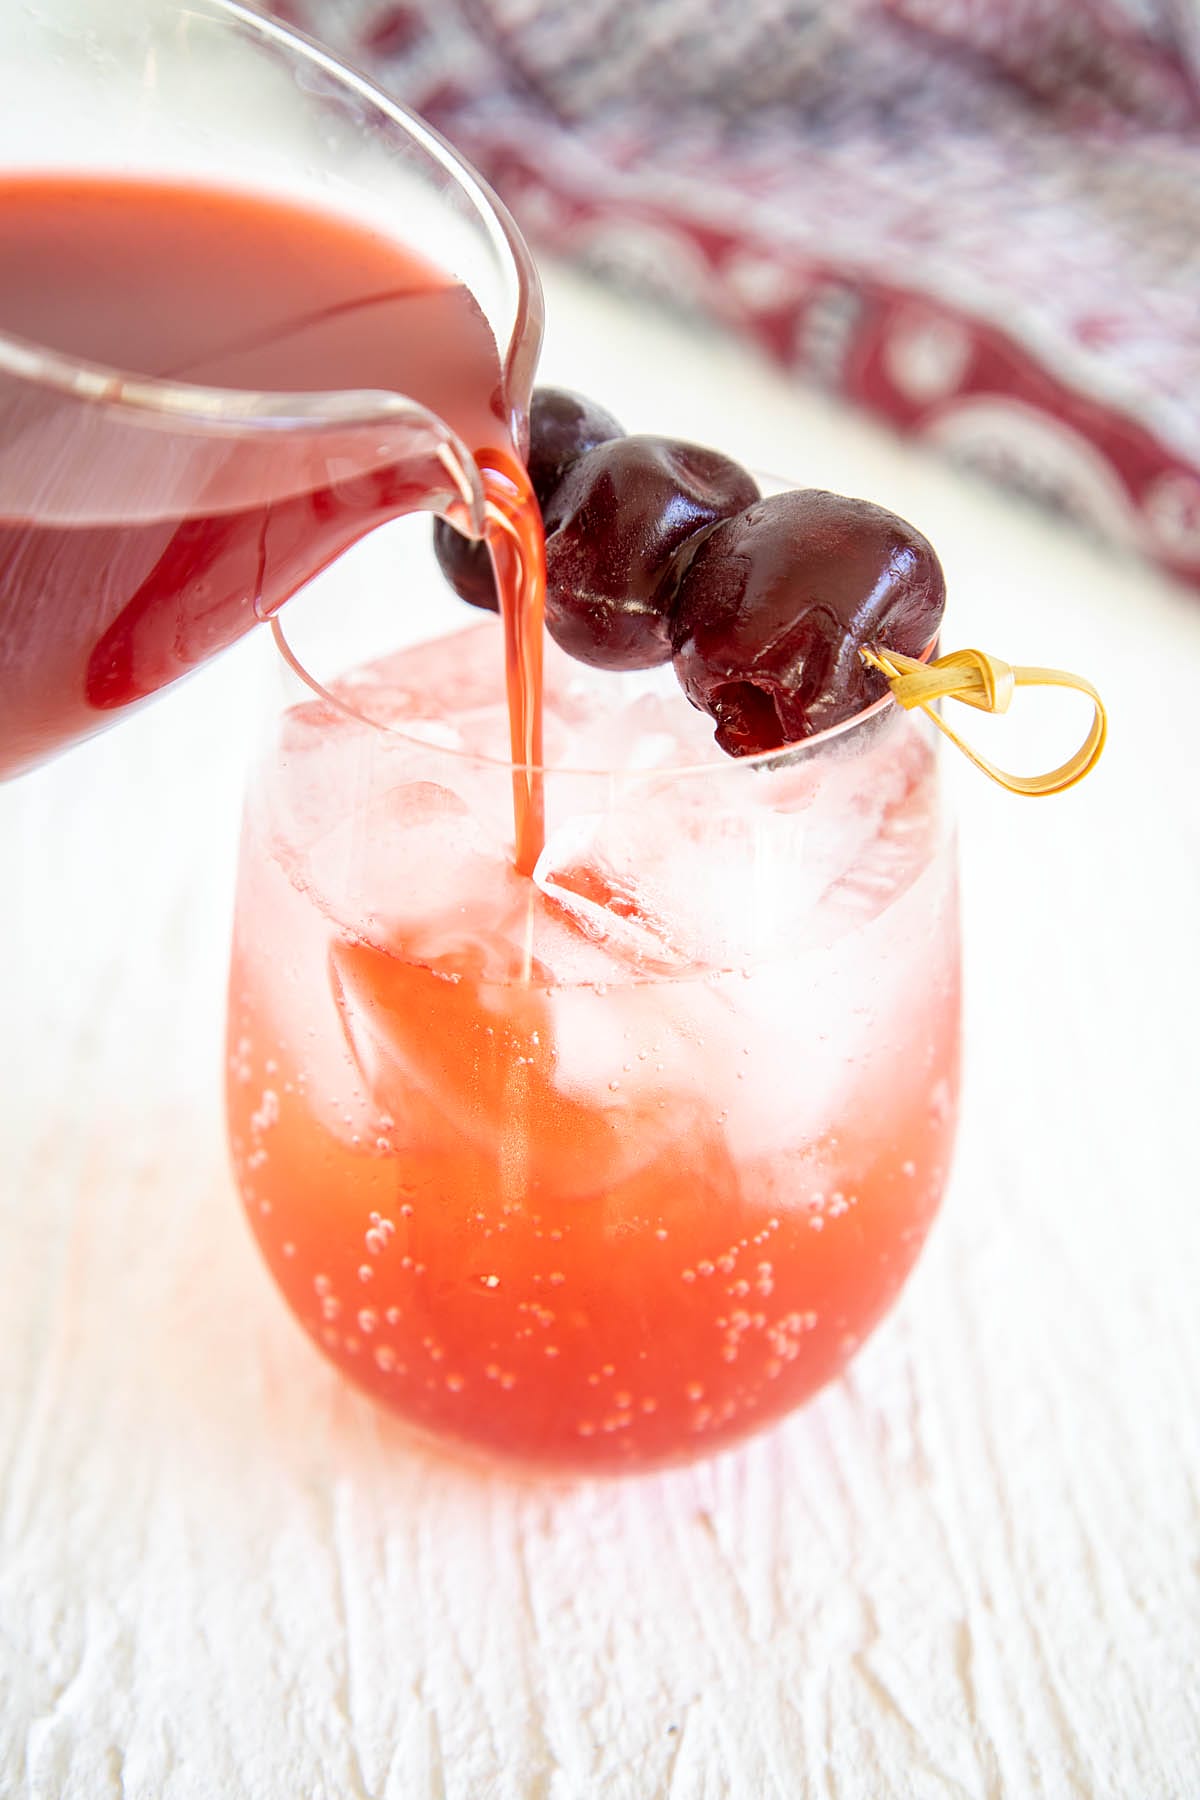 Tart Cherry Shrub being poured into a glass with club soda and ice cubes.